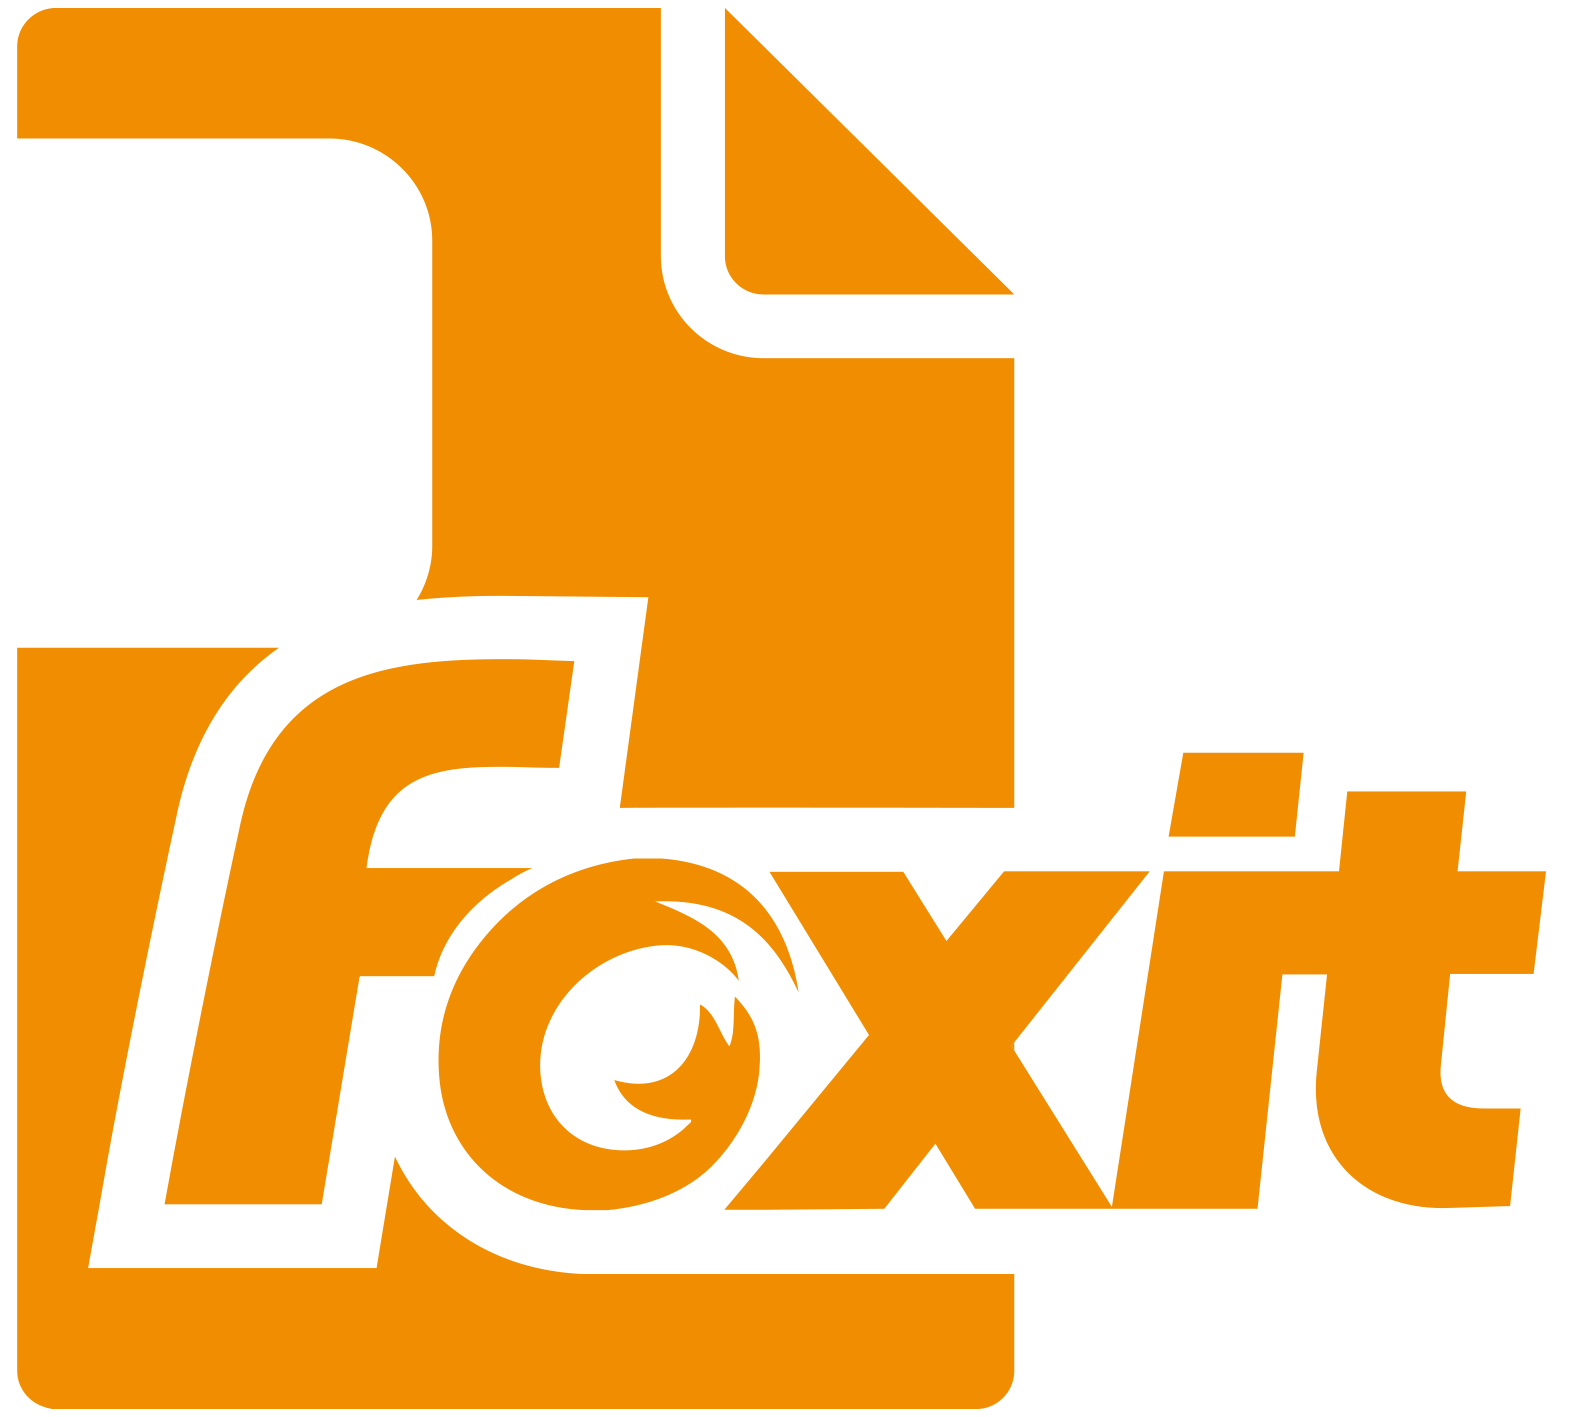 foxit pdf reader free download full version with crack